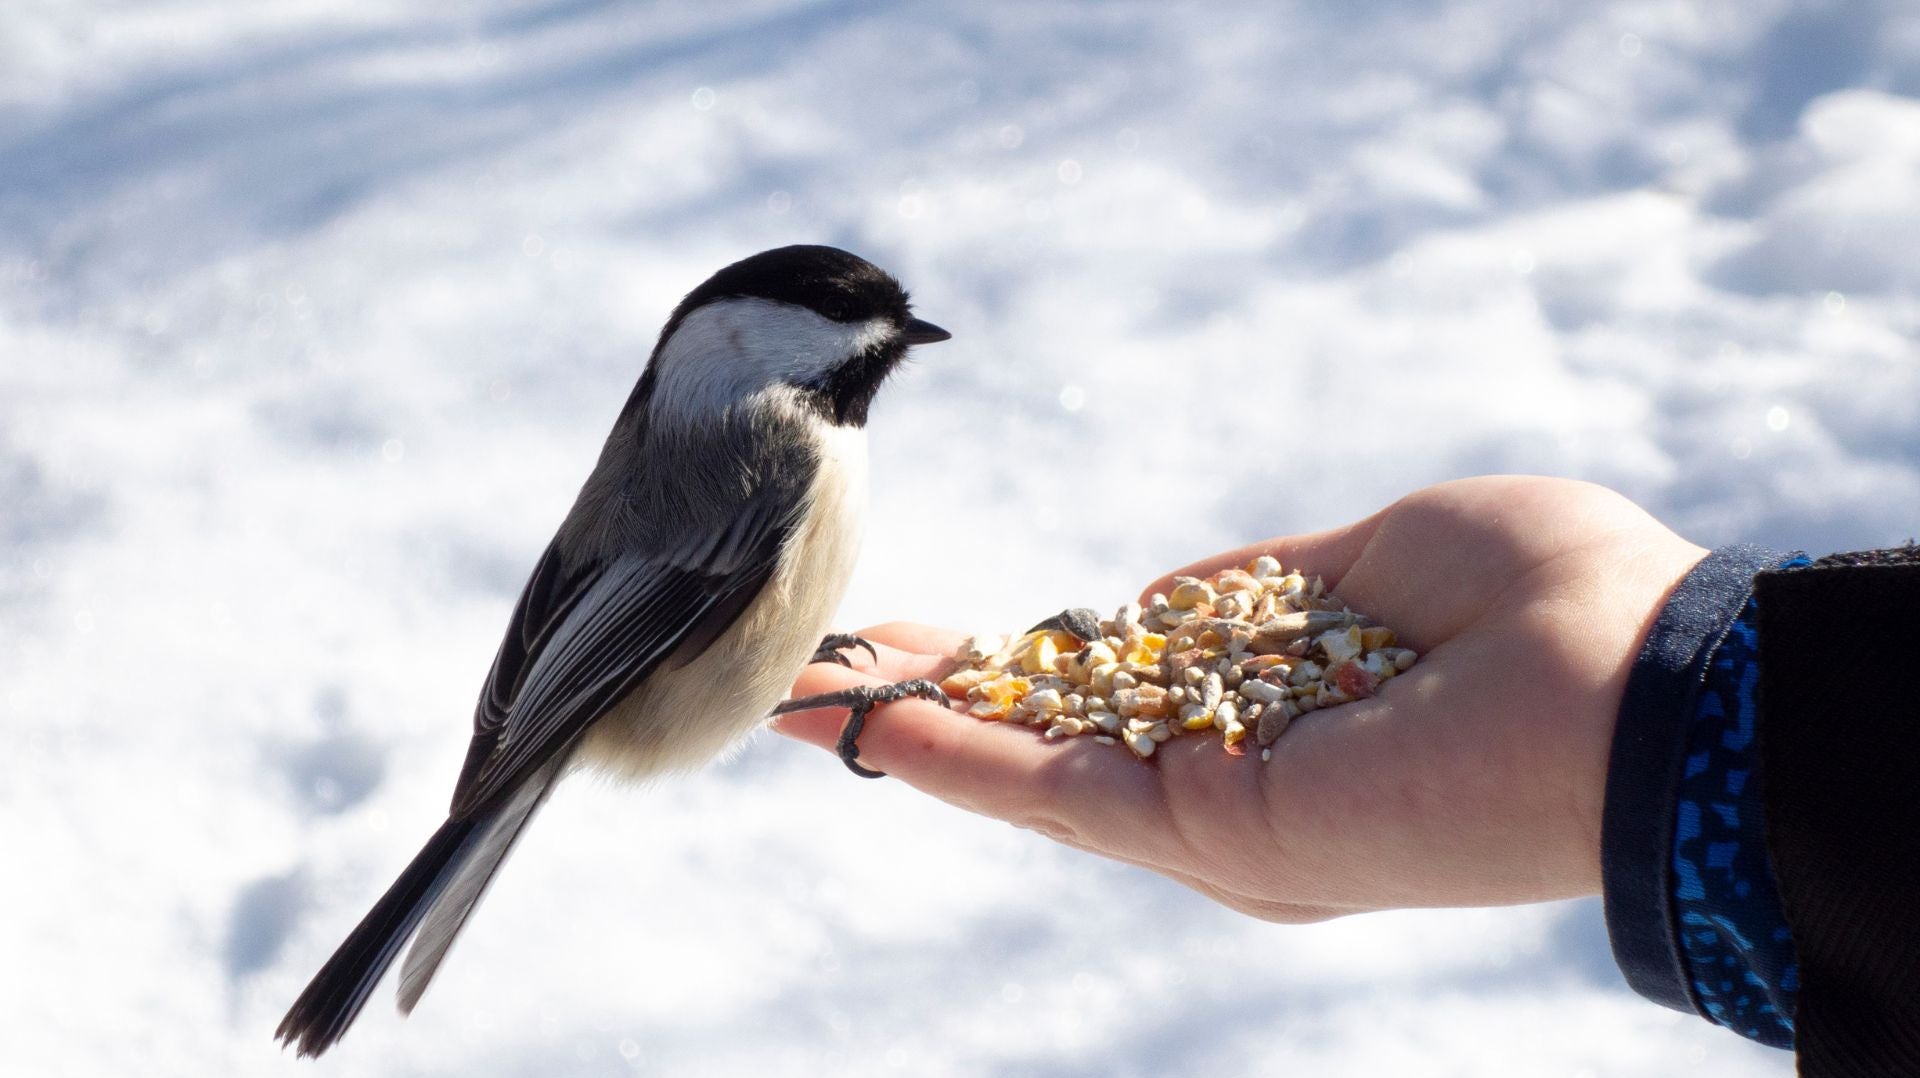 5 Tips for Feeding Feathered Friends in Your Ontario Garden